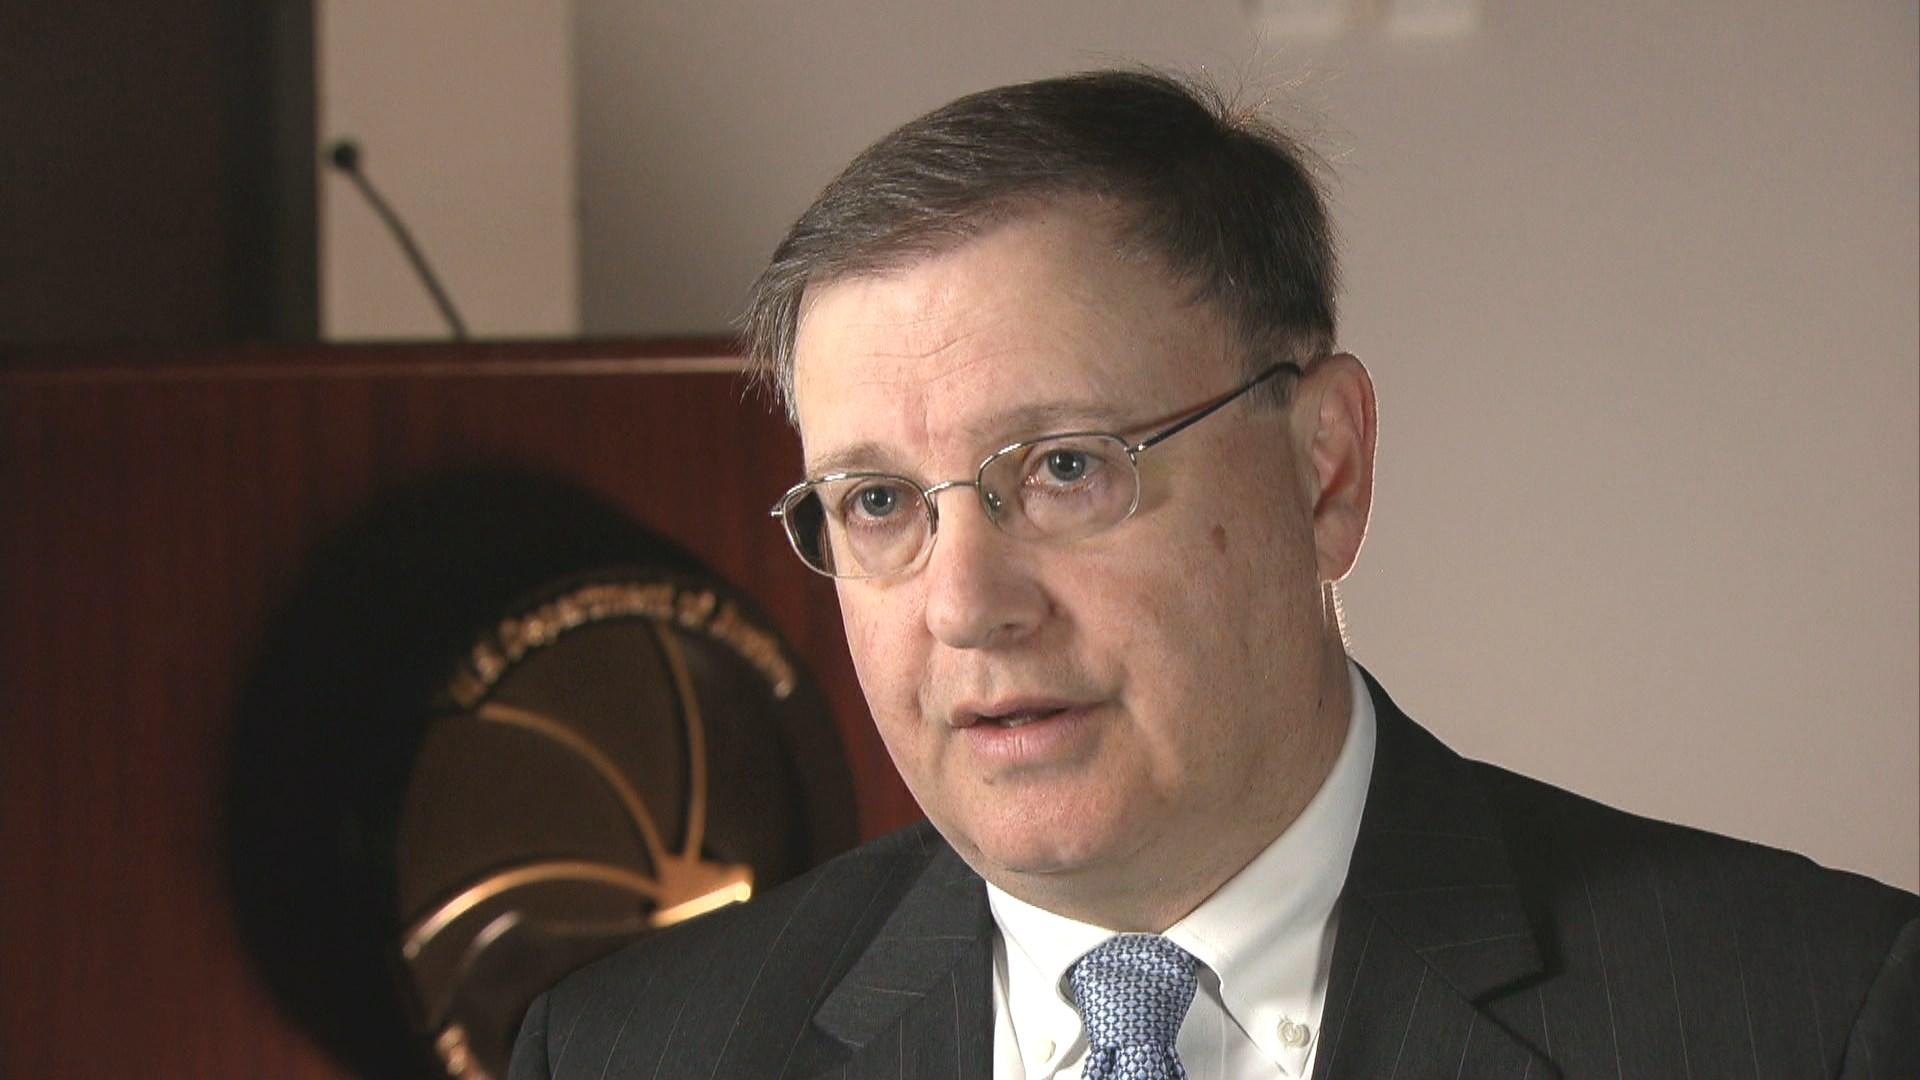 DEA chief Chuck Rosenberg on opioids "It scares the hell